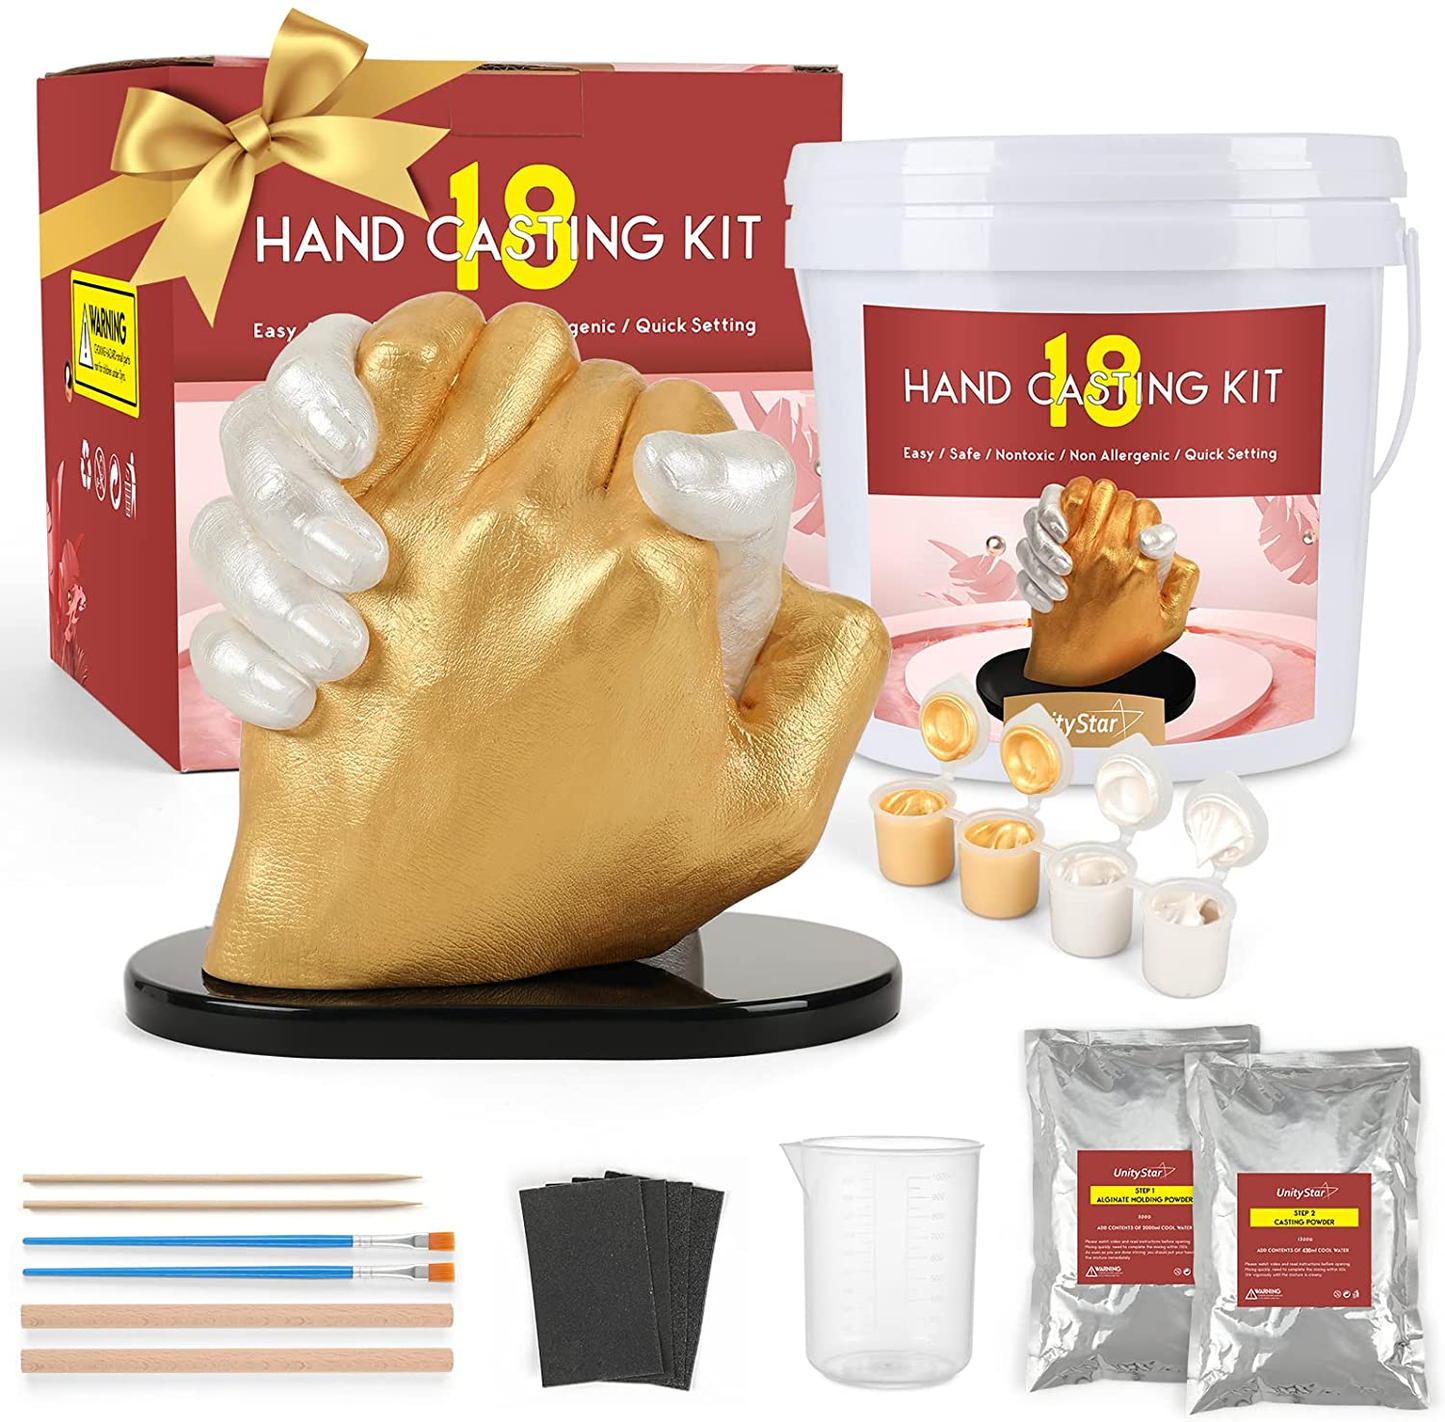 Hand Mold Kit for Couples, Unitystar Hand Casting Kit for Adult Mother'S Day Gift Hand Plaster Kit for Couple DIY Hand Statue Kit Adult & Child, Wedding, Friends, Anniversary